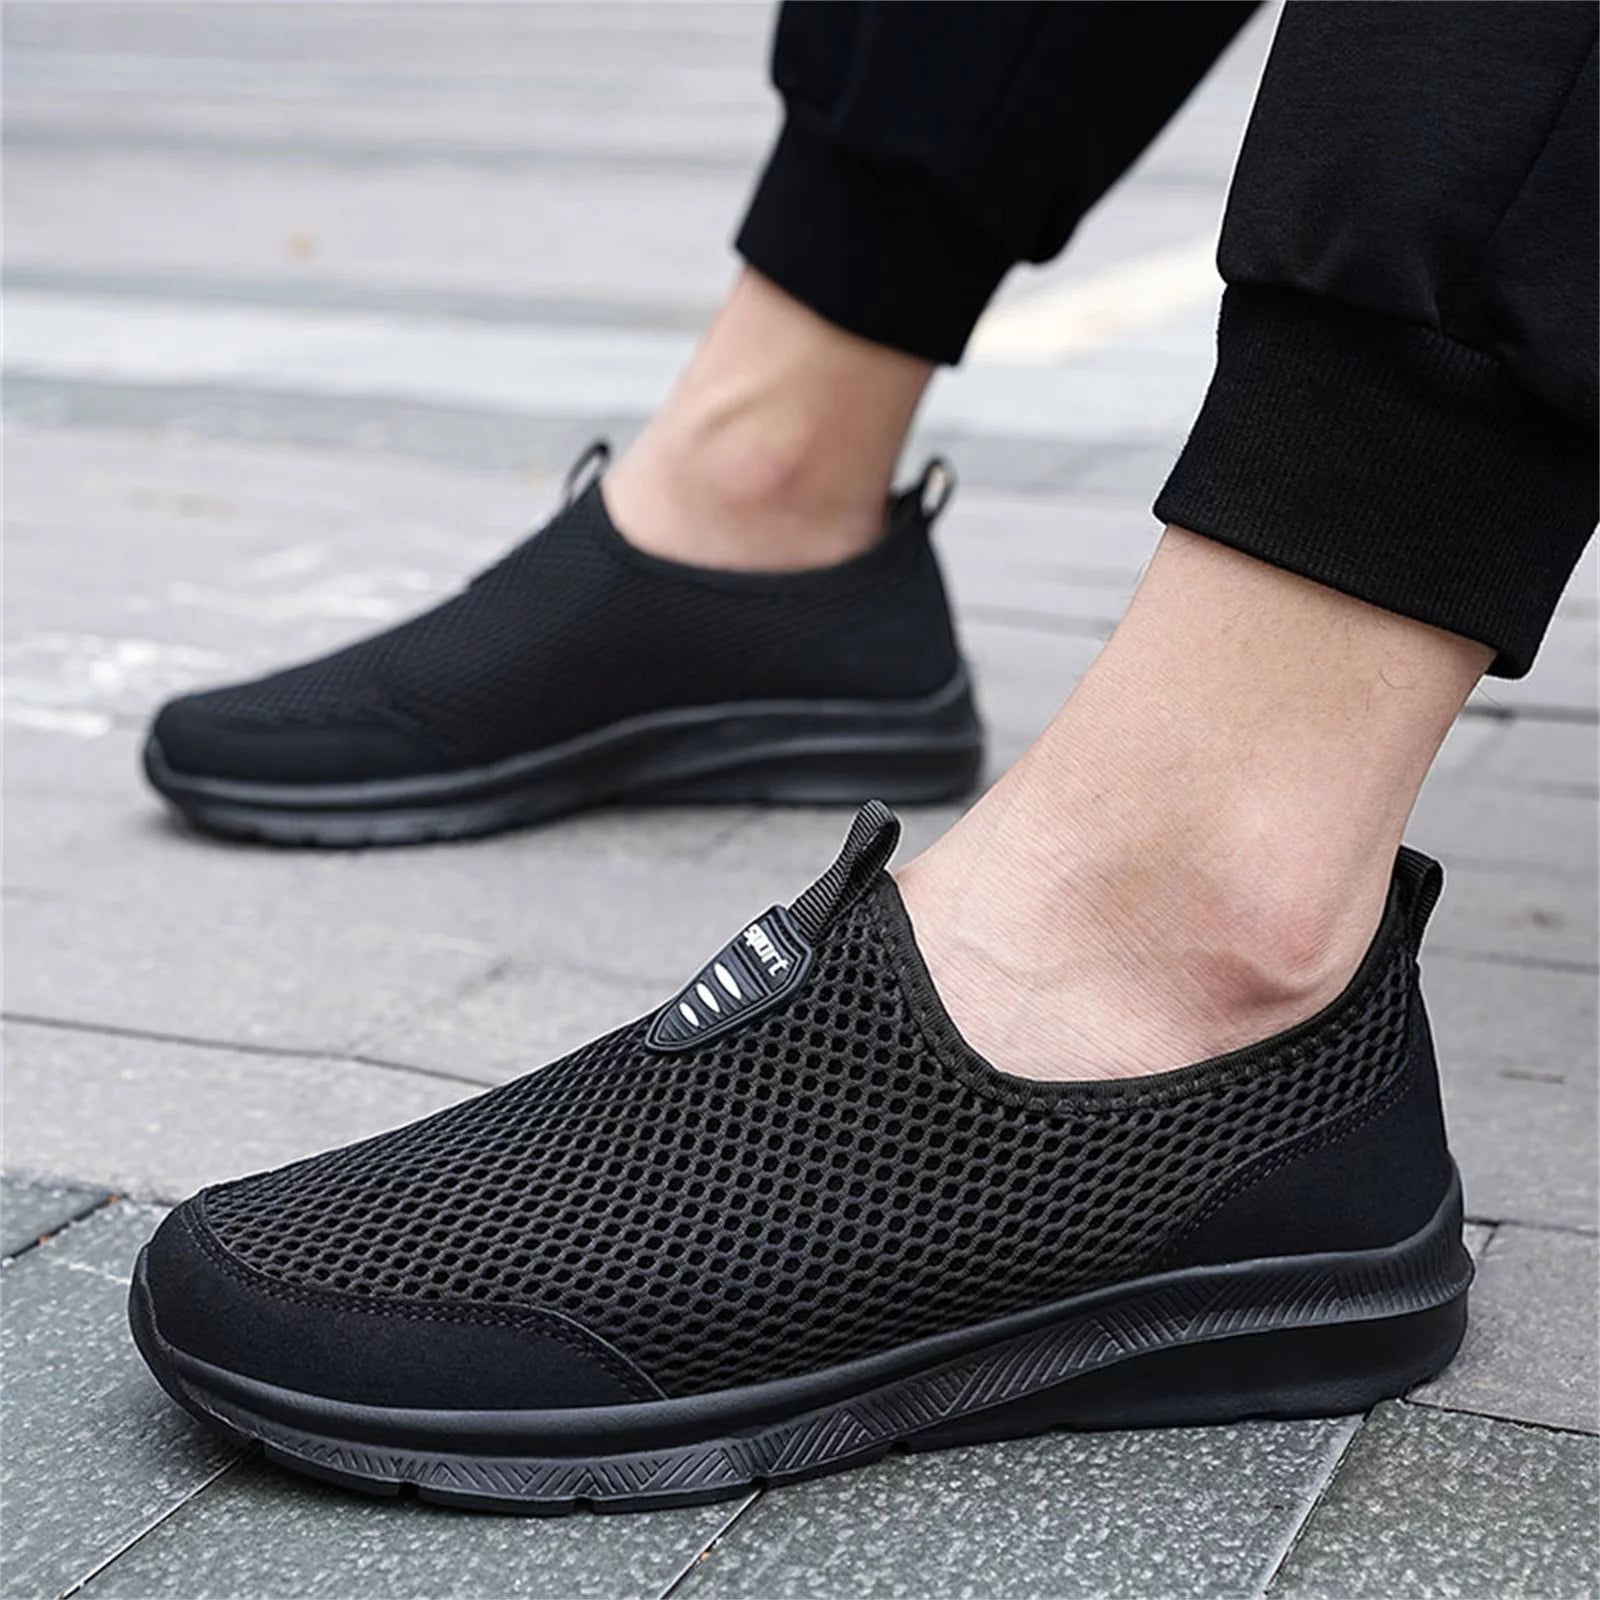 Comfortable men's work shoes made of breathable mesh with a jogger